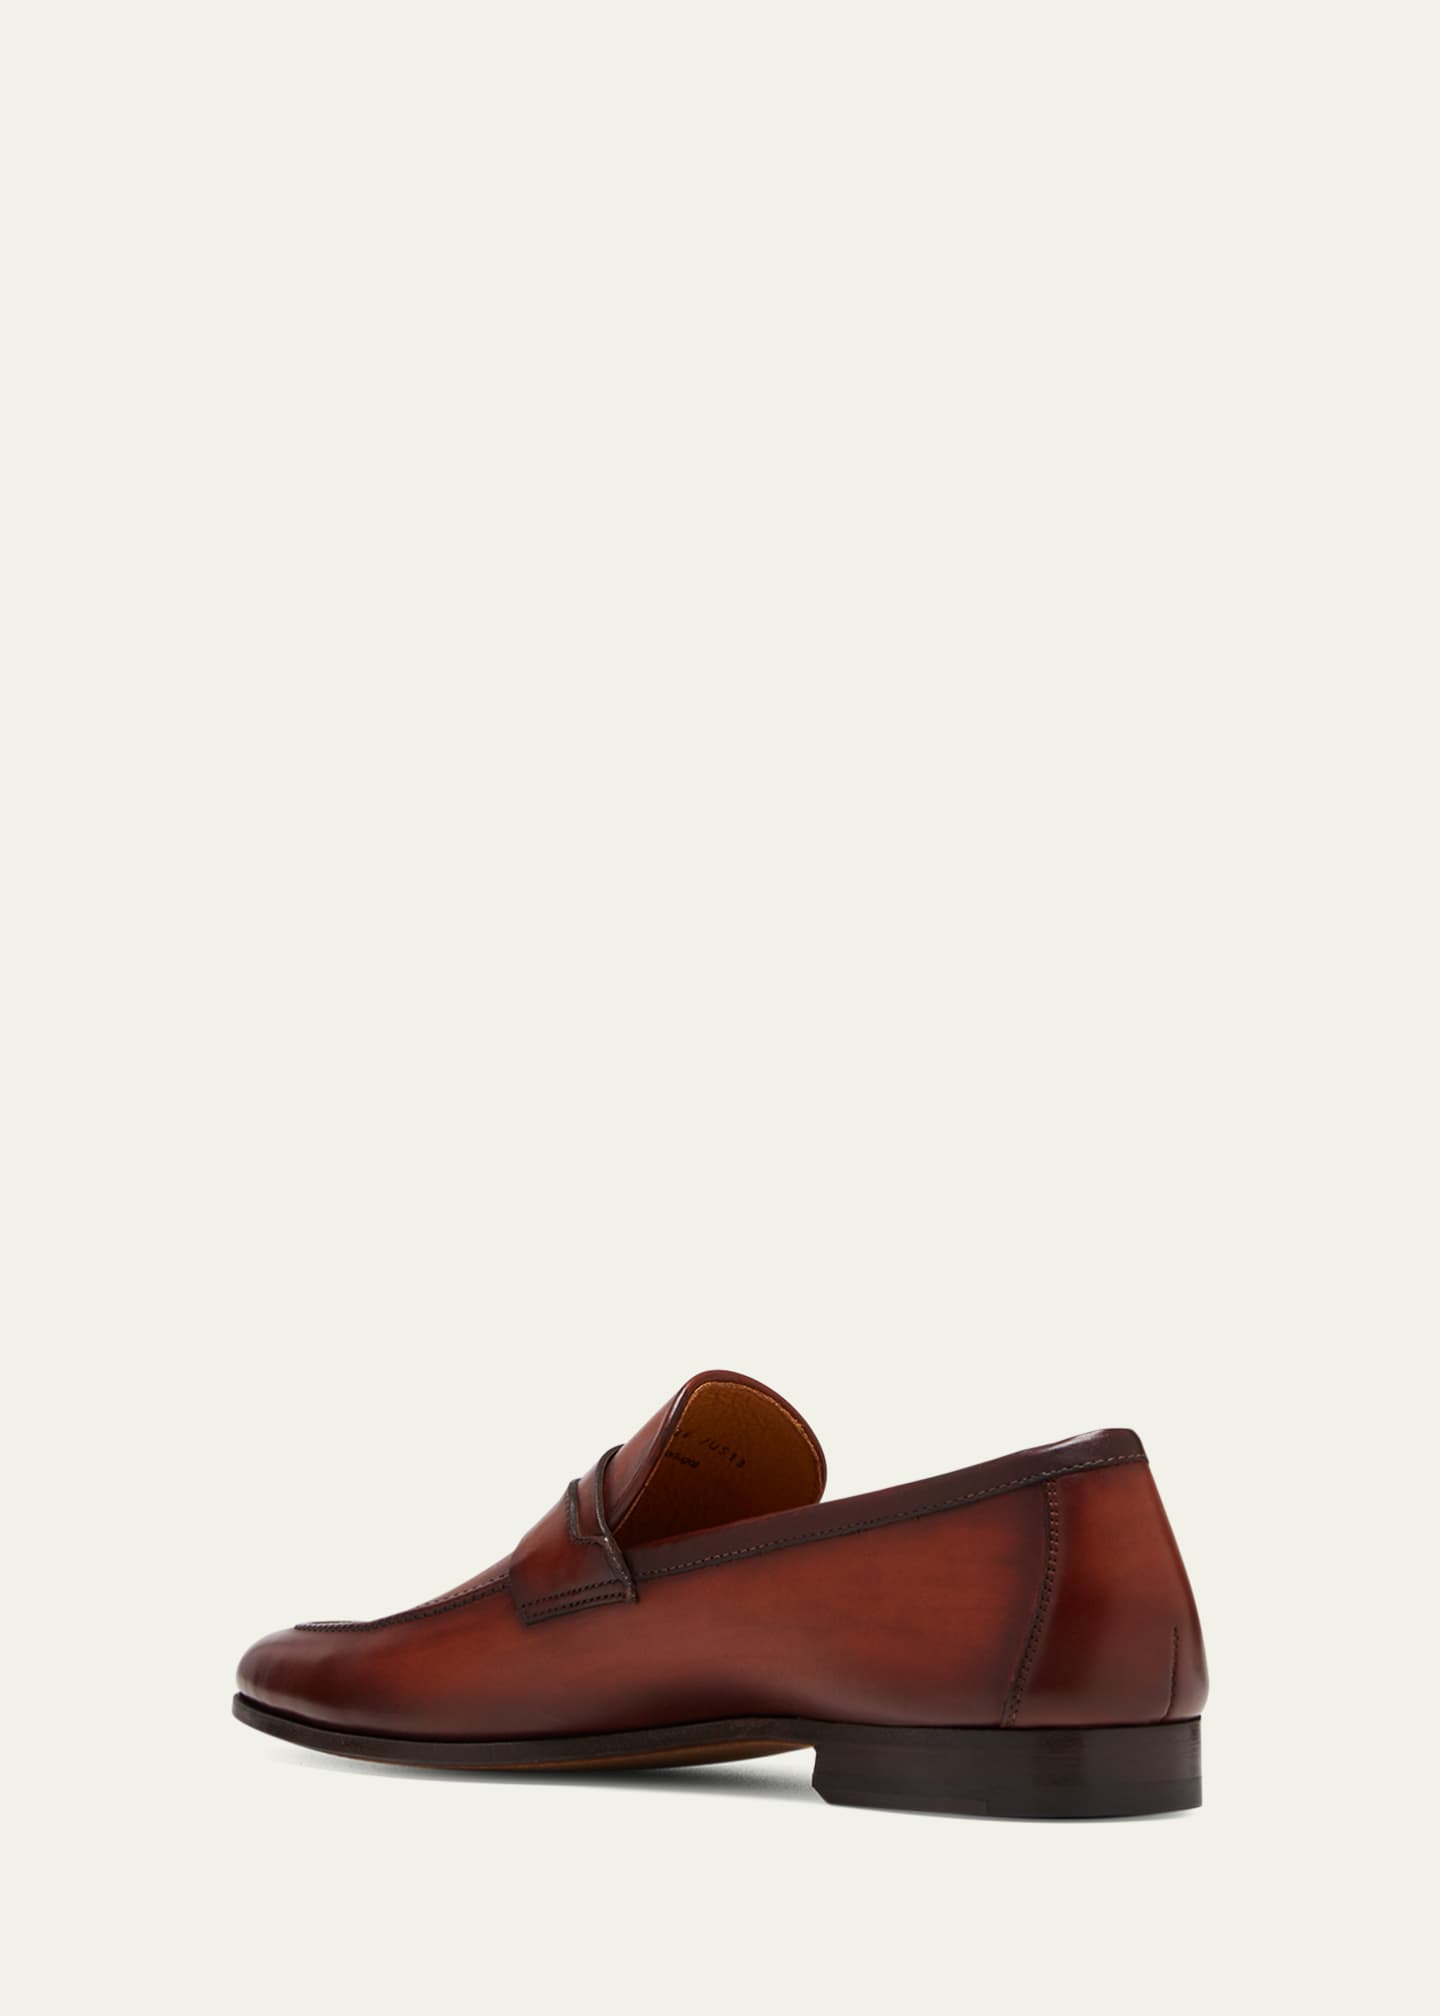 Magnanni Men's Sasso Suede and Leather Penny Loafers - Bergdorf Goodman